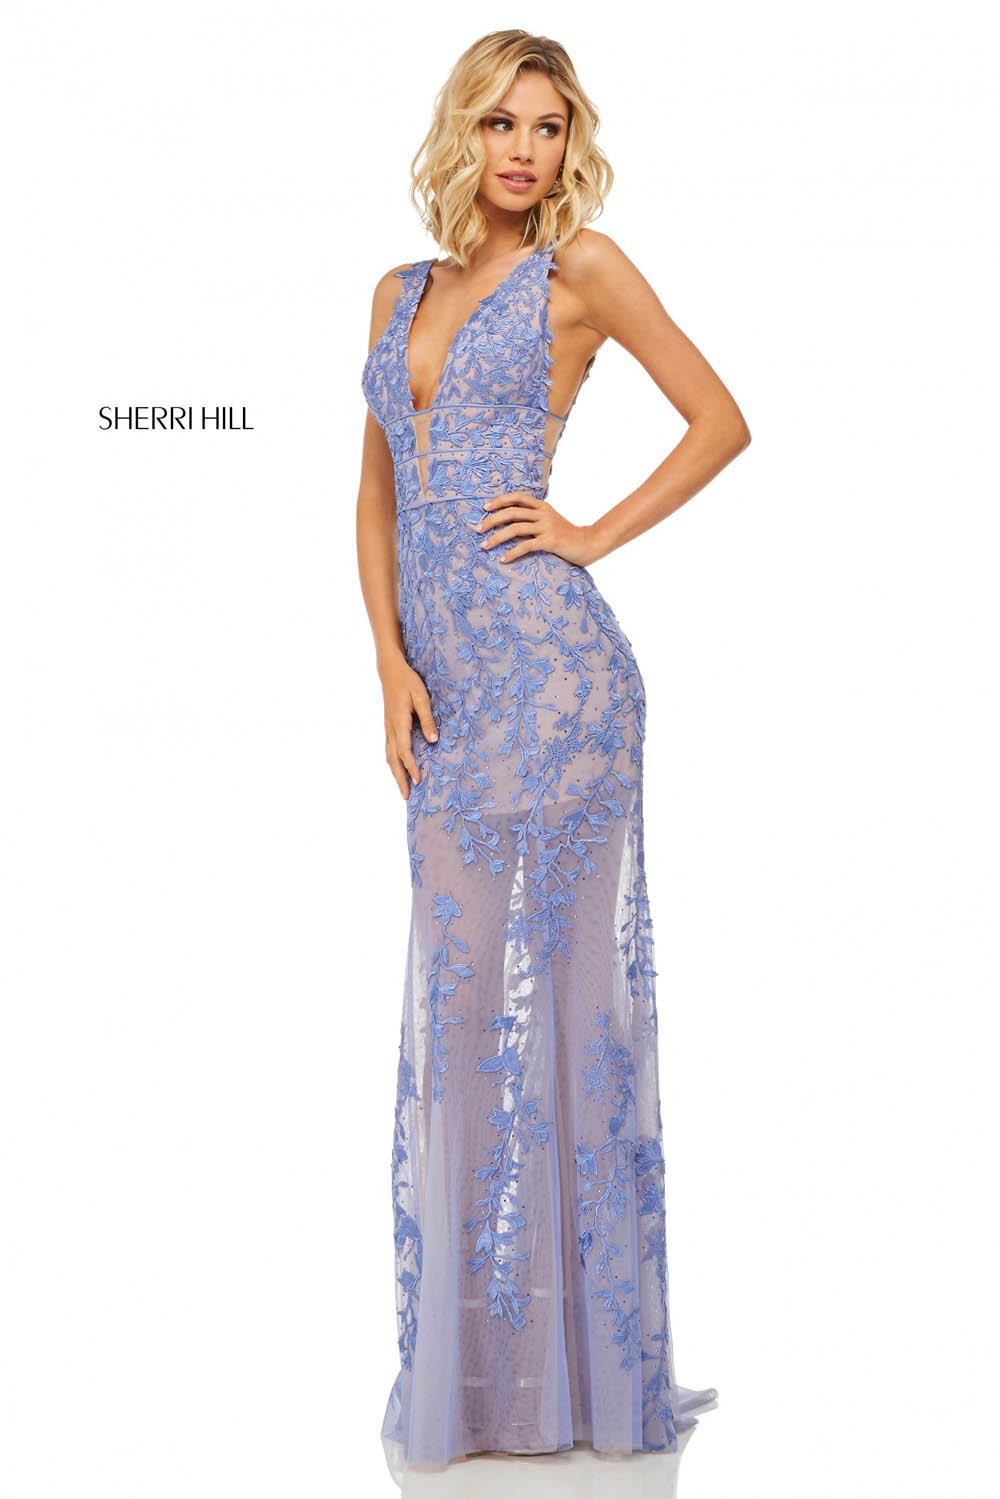 Sherri Hill 52820 dress images in these colors: Pink, Periwinkle, Light Blue, Red, Ivory, Black, Gold.